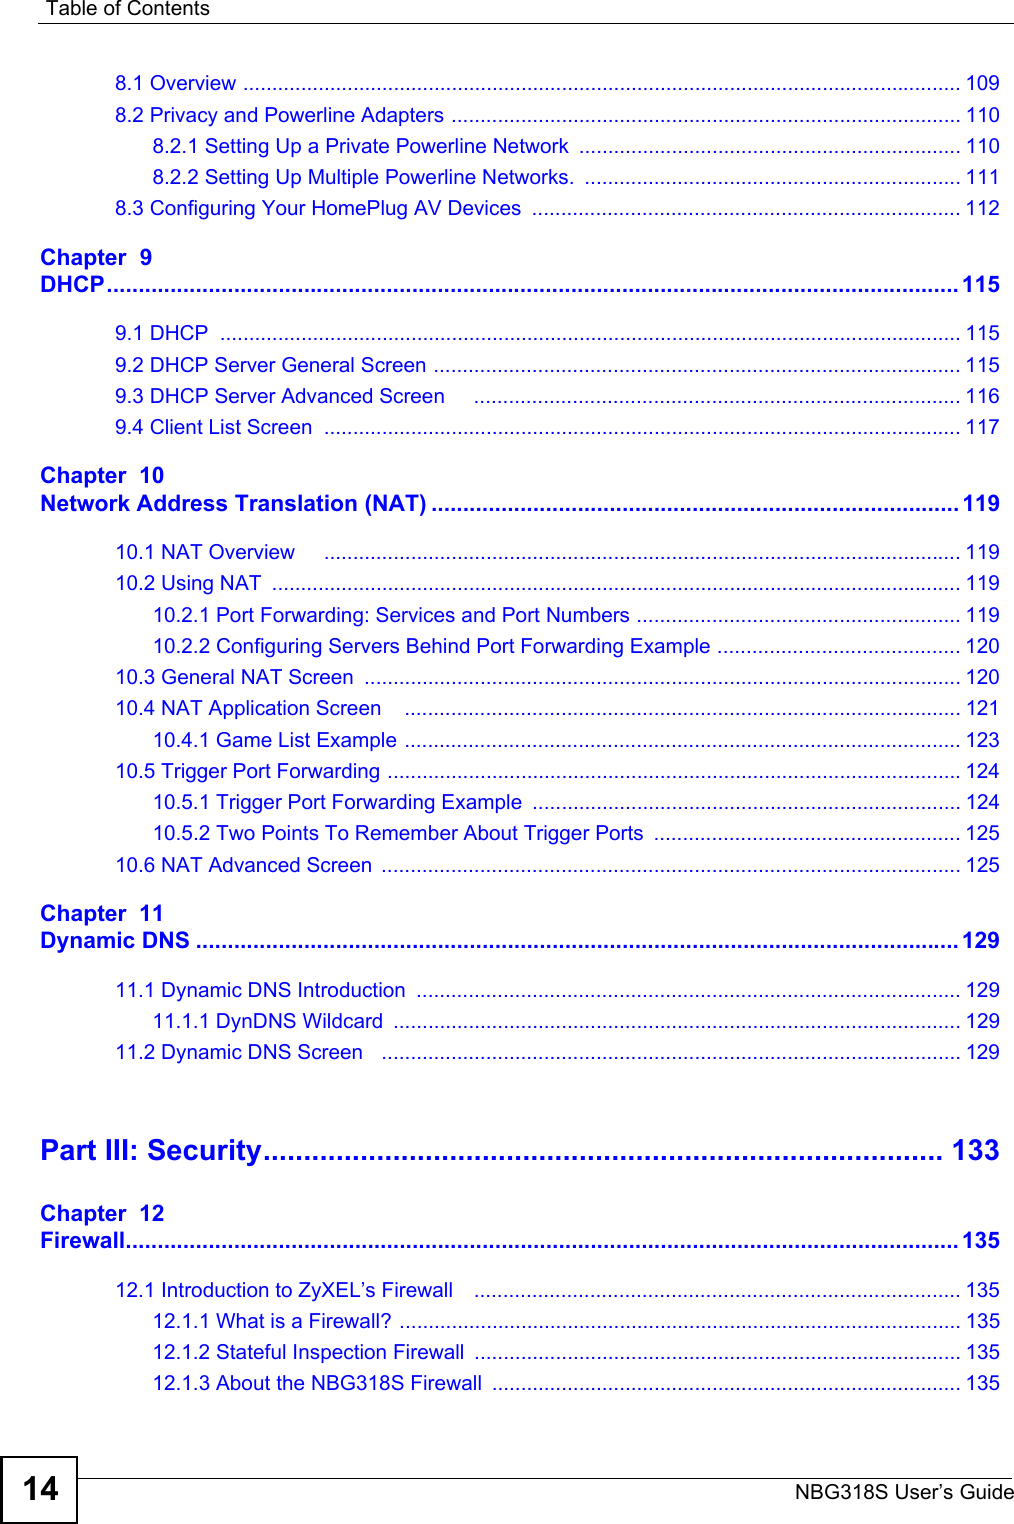 Table of ContentsNBG318S User’s Guide148.1 Overview ............................................................................................................................ 1098.2 Privacy and Powerline Adapters ........................................................................................ 1108.2.1 Setting Up a Private Powerline Network  .................................................................. 1108.2.2 Setting Up Multiple Powerline Networks.  ................................................................. 1118.3 Configuring Your HomePlug AV Devices  .......................................................................... 112Chapter  9DHCP...................................................................................................................................... 1159.1 DHCP  ................................................................................................................................ 1159.2 DHCP Server General Screen ........................................................................................... 1159.3 DHCP Server Advanced Screen     .................................................................................... 1169.4 Client List Screen  .............................................................................................................. 117Chapter  10Network Address Translation (NAT) ................................................................................... 11910.1 NAT Overview     .............................................................................................................. 11910.2 Using NAT  ....................................................................................................................... 11910.2.1 Port Forwarding: Services and Port Numbers ........................................................ 11910.2.2 Configuring Servers Behind Port Forwarding Example .......................................... 12010.3 General NAT Screen  ....................................................................................................... 12010.4 NAT Application Screen    ................................................................................................ 12110.4.1 Game List Example ................................................................................................ 12310.5 Trigger Port Forwarding ...................................................................................................12410.5.1 Trigger Port Forwarding Example  .......................................................................... 12410.5.2 Two Points To Remember About Trigger Ports  ..................................................... 12510.6 NAT Advanced Screen  .................................................................................................... 125Chapter  11Dynamic DNS ........................................................................................................................ 12911.1 Dynamic DNS Introduction  .............................................................................................. 12911.1.1 DynDNS Wildcard  .................................................................................................. 12911.2 Dynamic DNS Screen   .................................................................................................... 129Part III: Security.................................................................................... 133Chapter  12Firewall................................................................................................................................... 13512.1 Introduction to ZyXEL’s Firewall    .................................................................................... 13512.1.1 What is a Firewall? ................................................................................................. 13512.1.2 Stateful Inspection Firewall  .................................................................................... 13512.1.3 About the NBG318S Firewall ................................................................................. 135